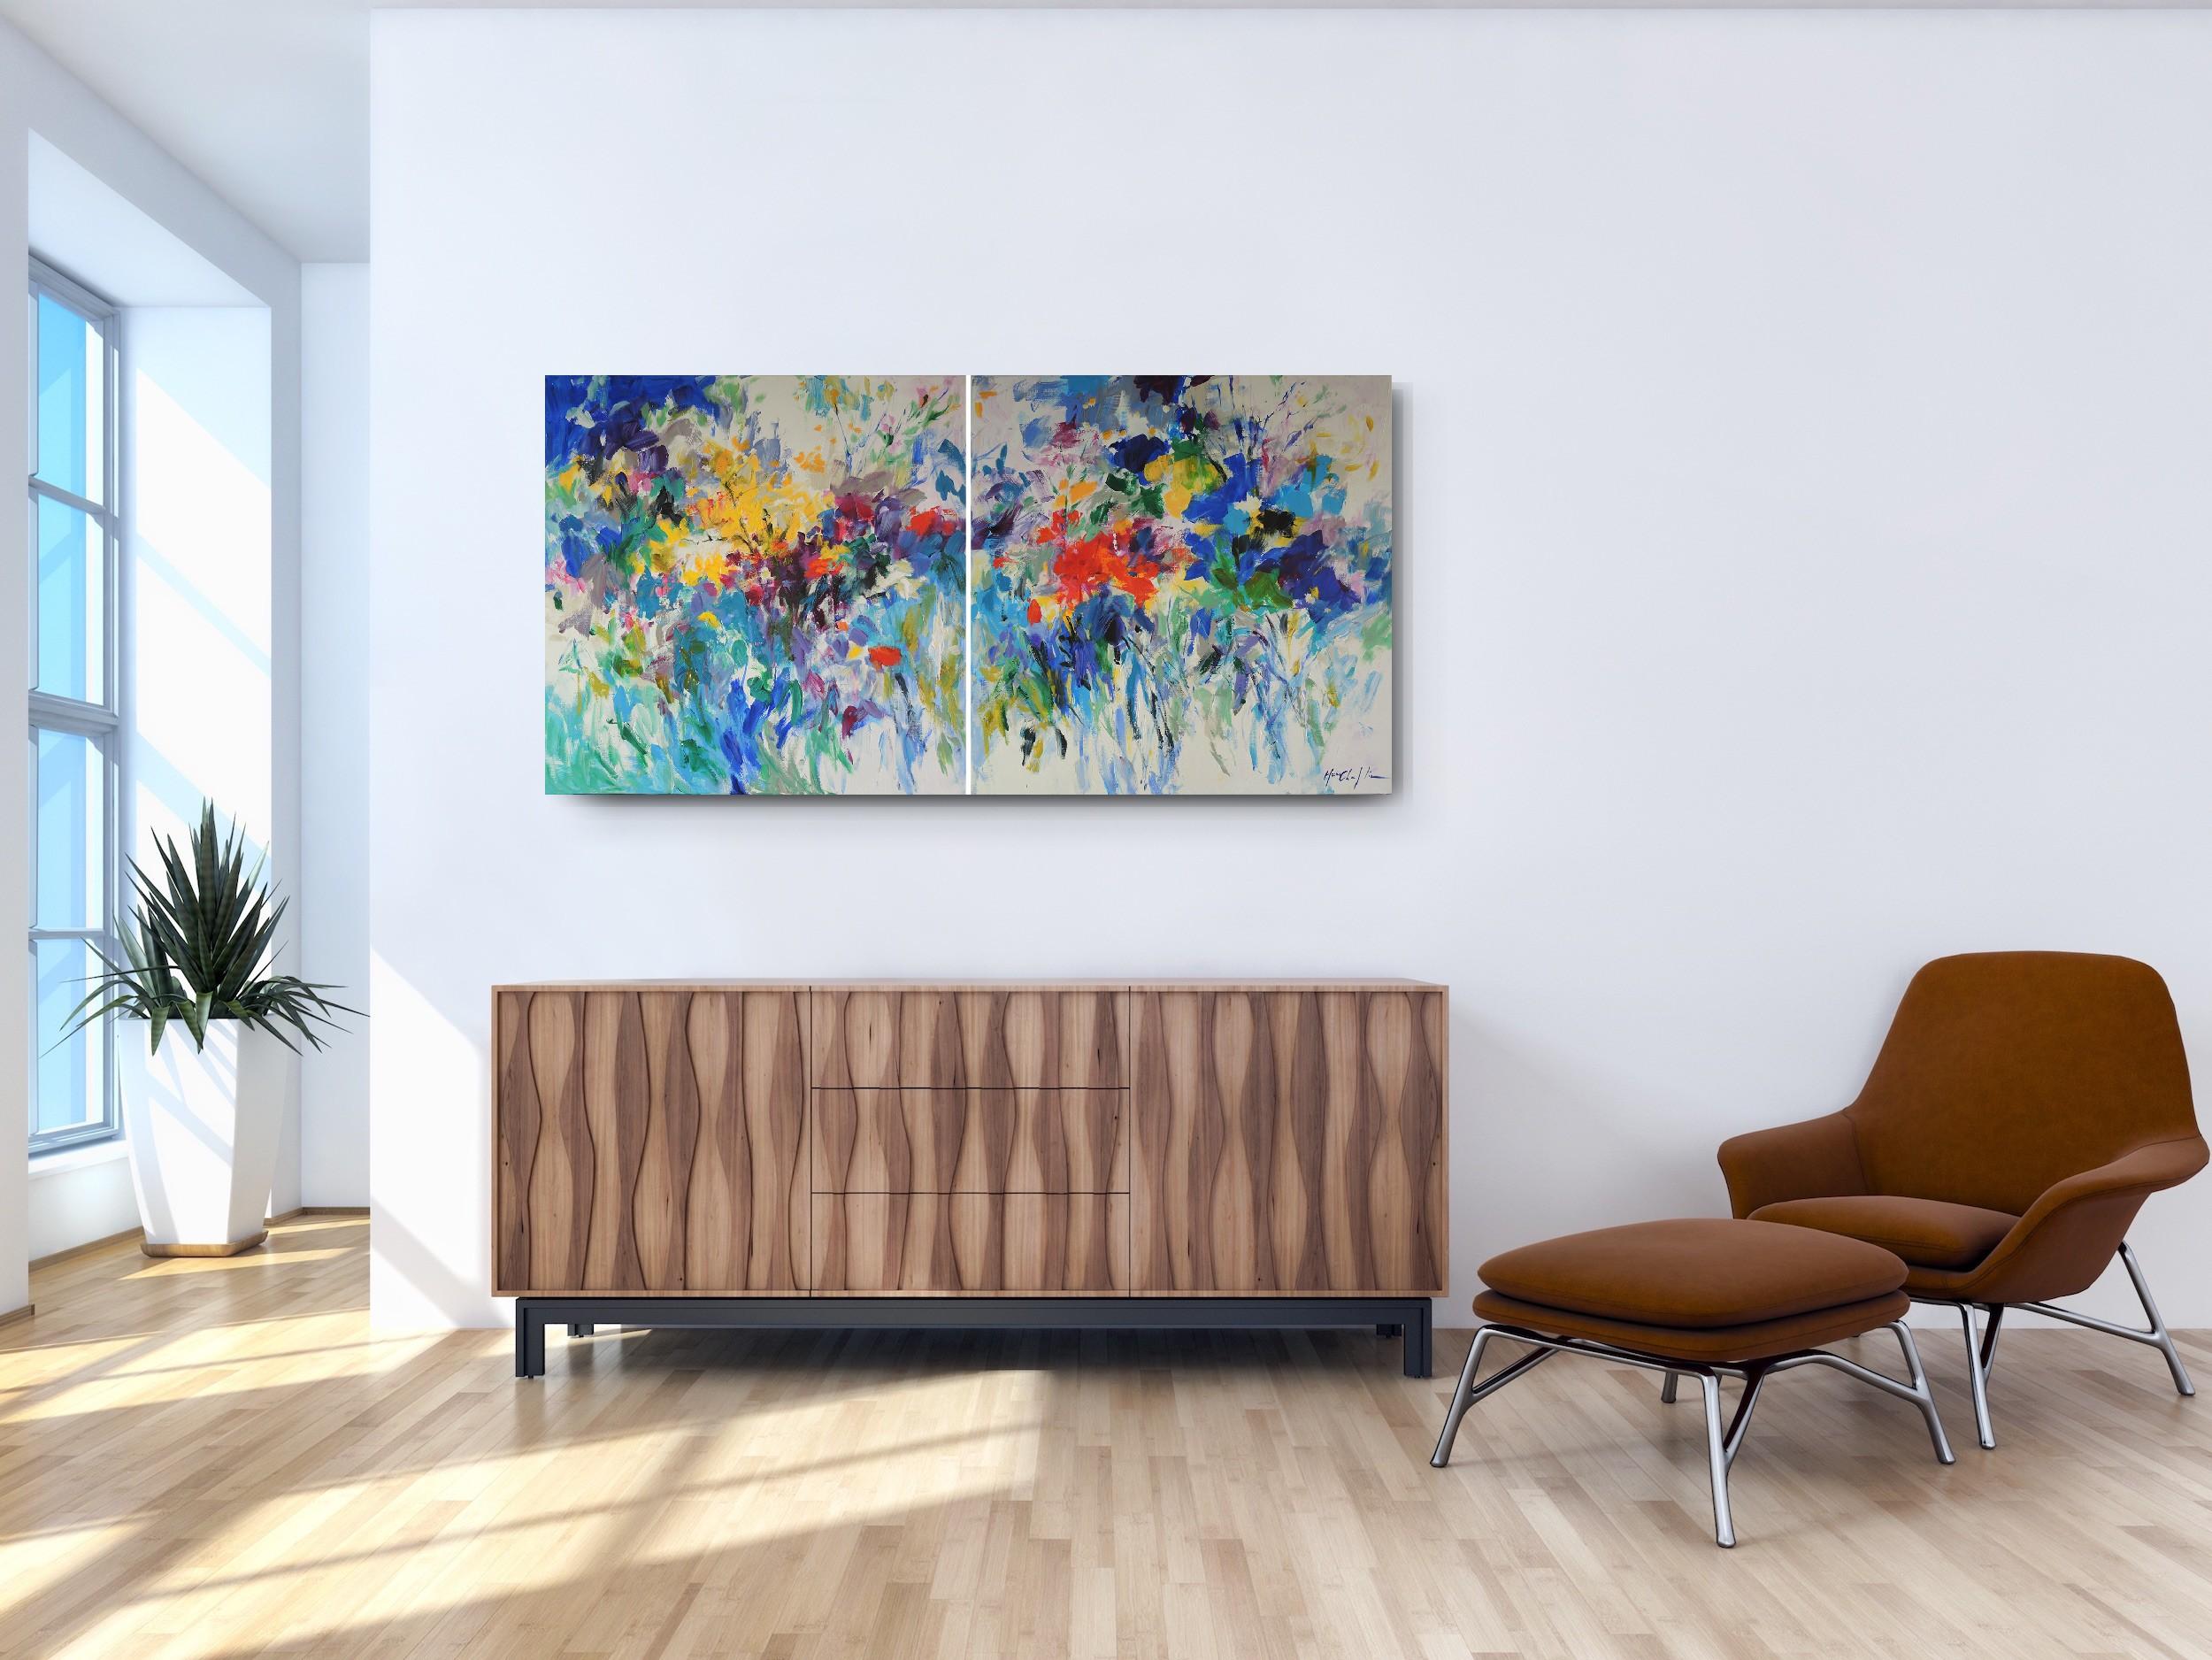 Summer feeling in blue, floral diptych [2021]

original
acrylic
Image size: H:70 cm x W:140 cm
Complete Size of Unframed Work: H:70 cm x W:140 cm x D:2cm
Sold Unframed
Please note that insitu images are purely an indication of how a piece may